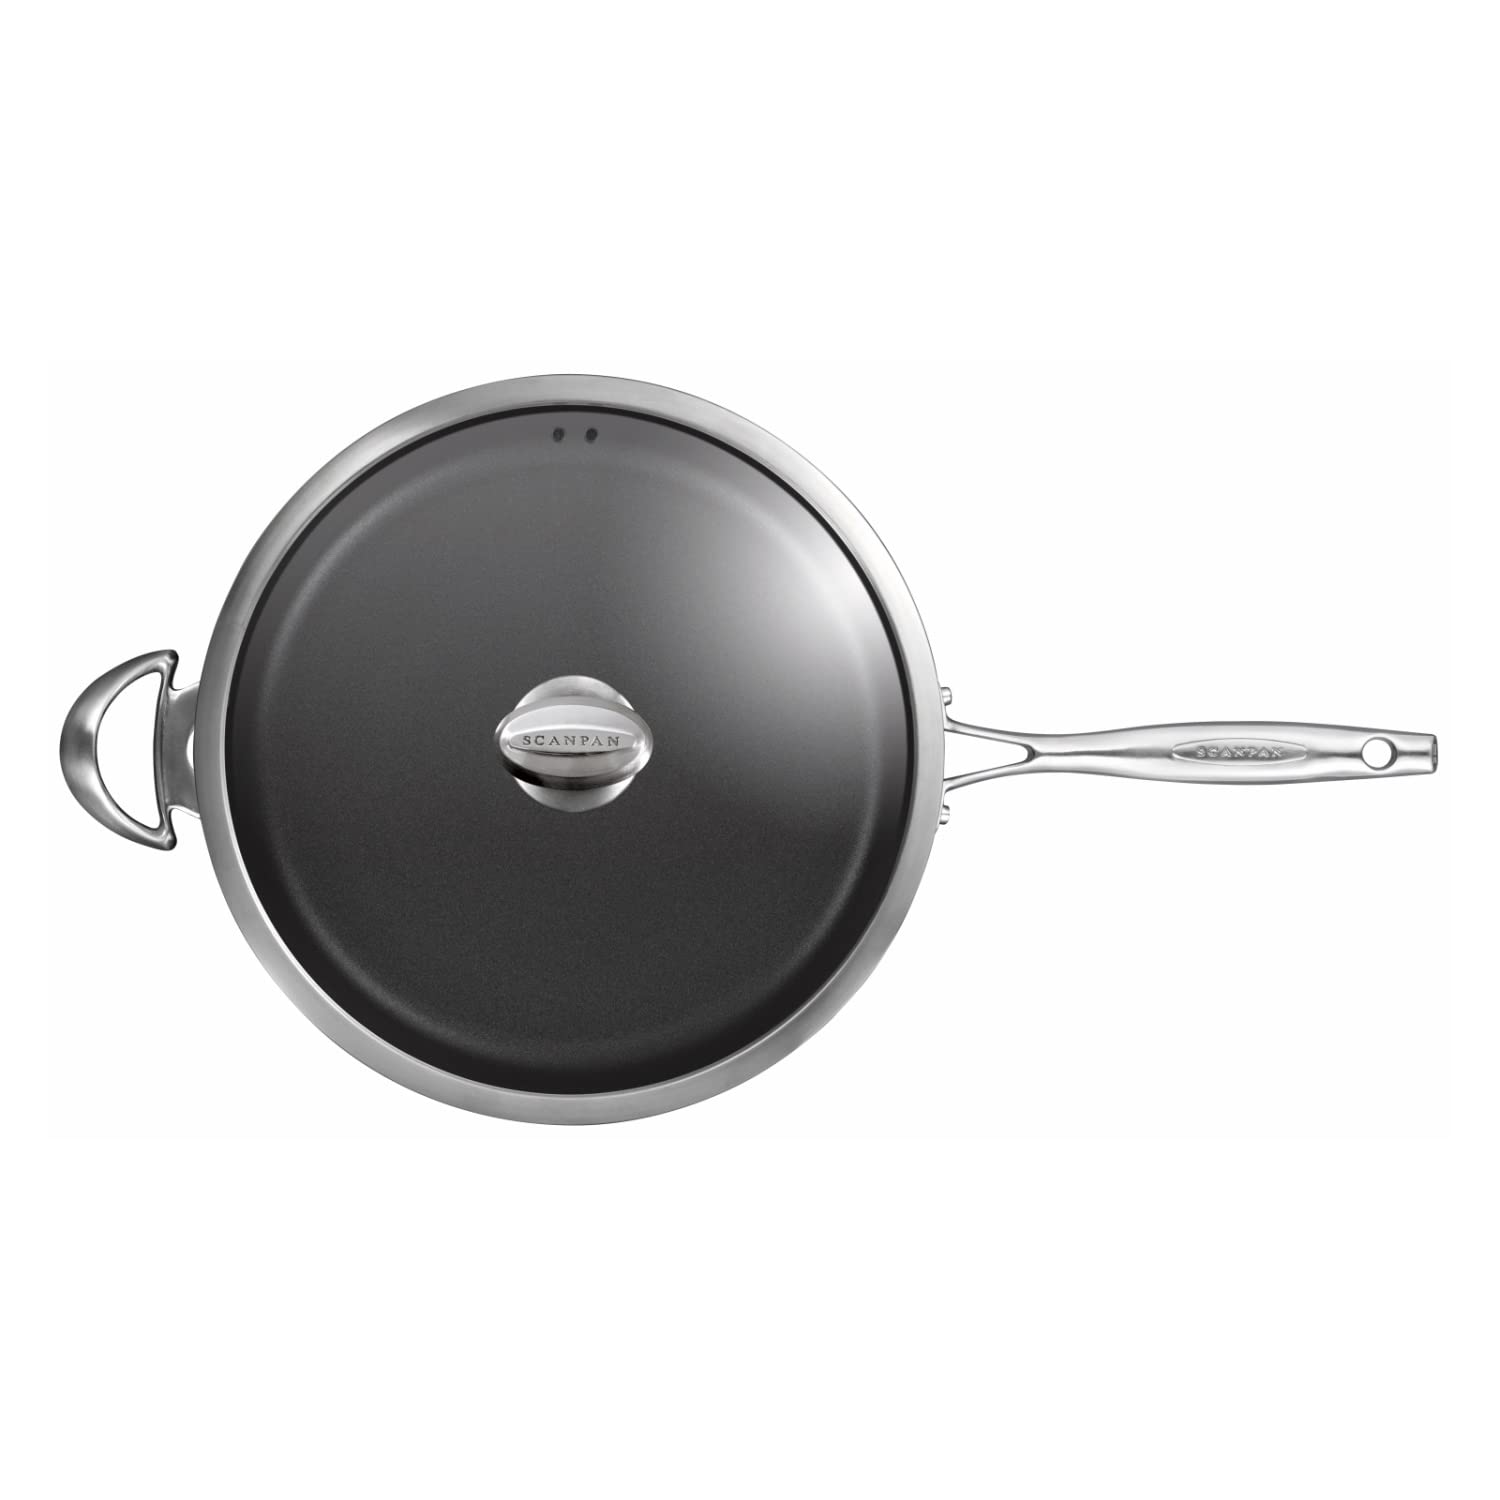 Scanpan Pro IQ 3.8 qt Covered Saute Pan - Easy-to-Use Nonstick Cookware - Dishwasher, Metal Utensil & Oven Safe - Made by Hand in Denmark